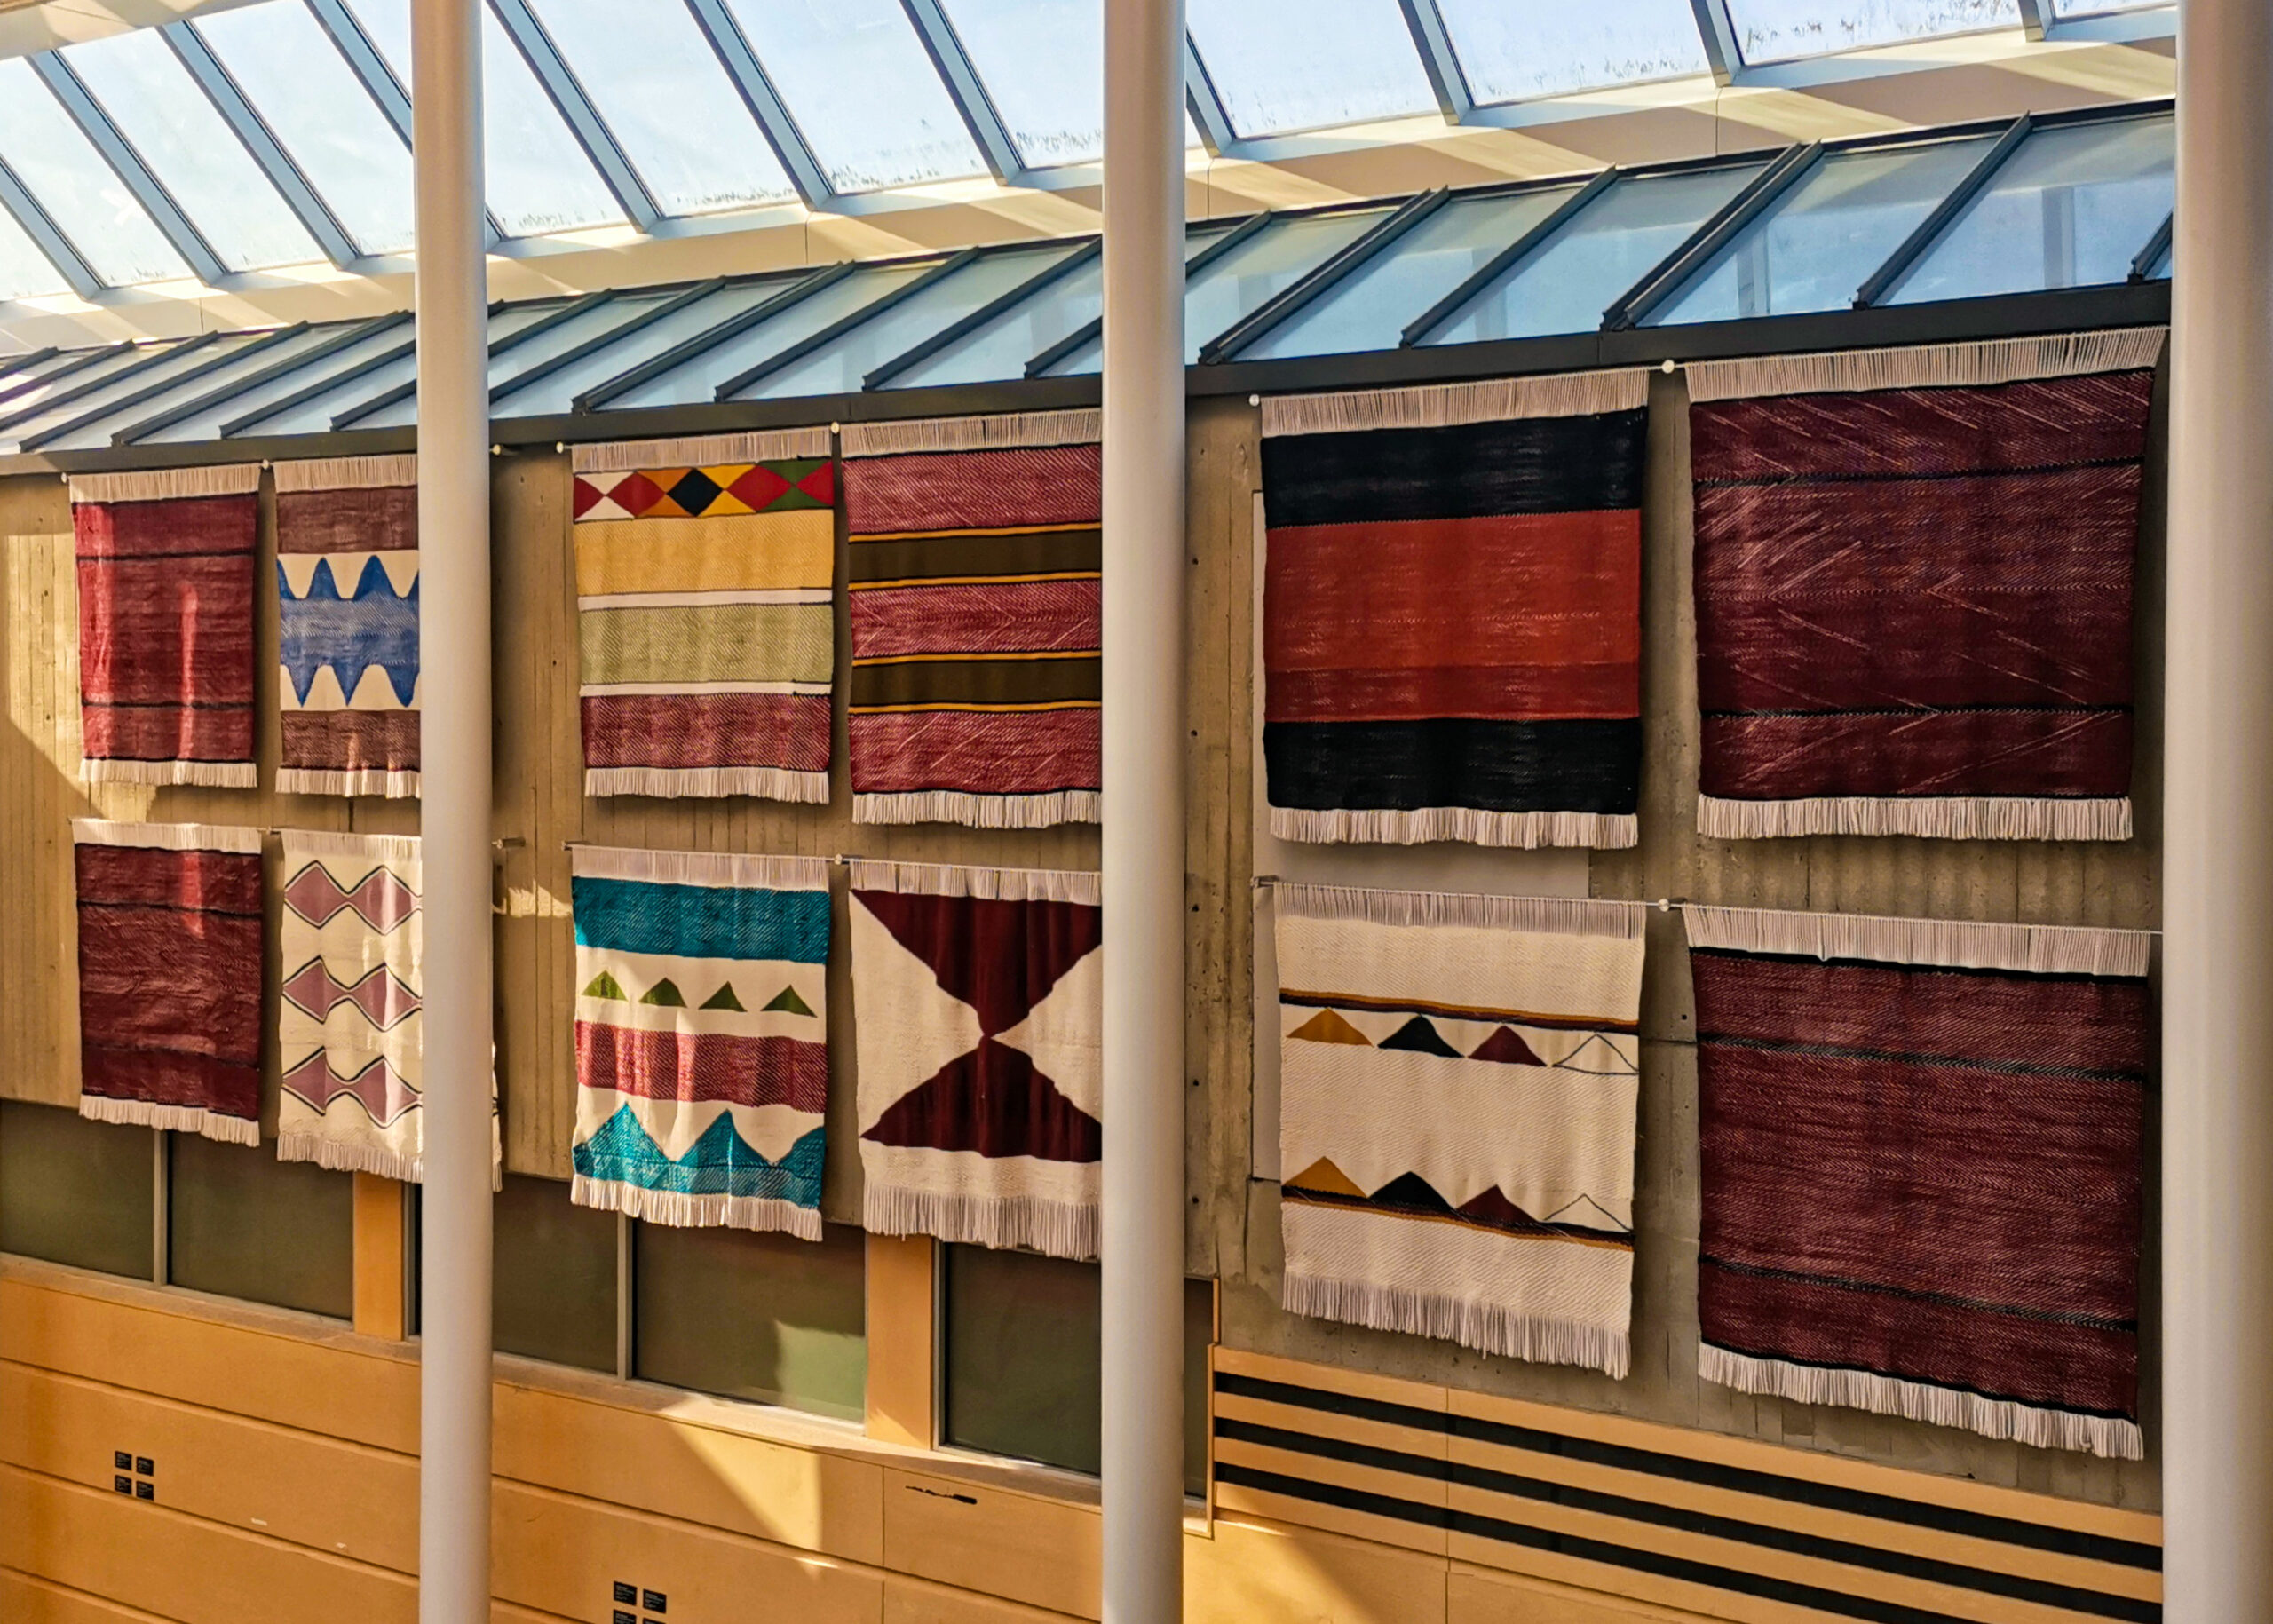 Nexw Niw Chet/The Teachings, a collection of hand woven Salish weaving blankets.